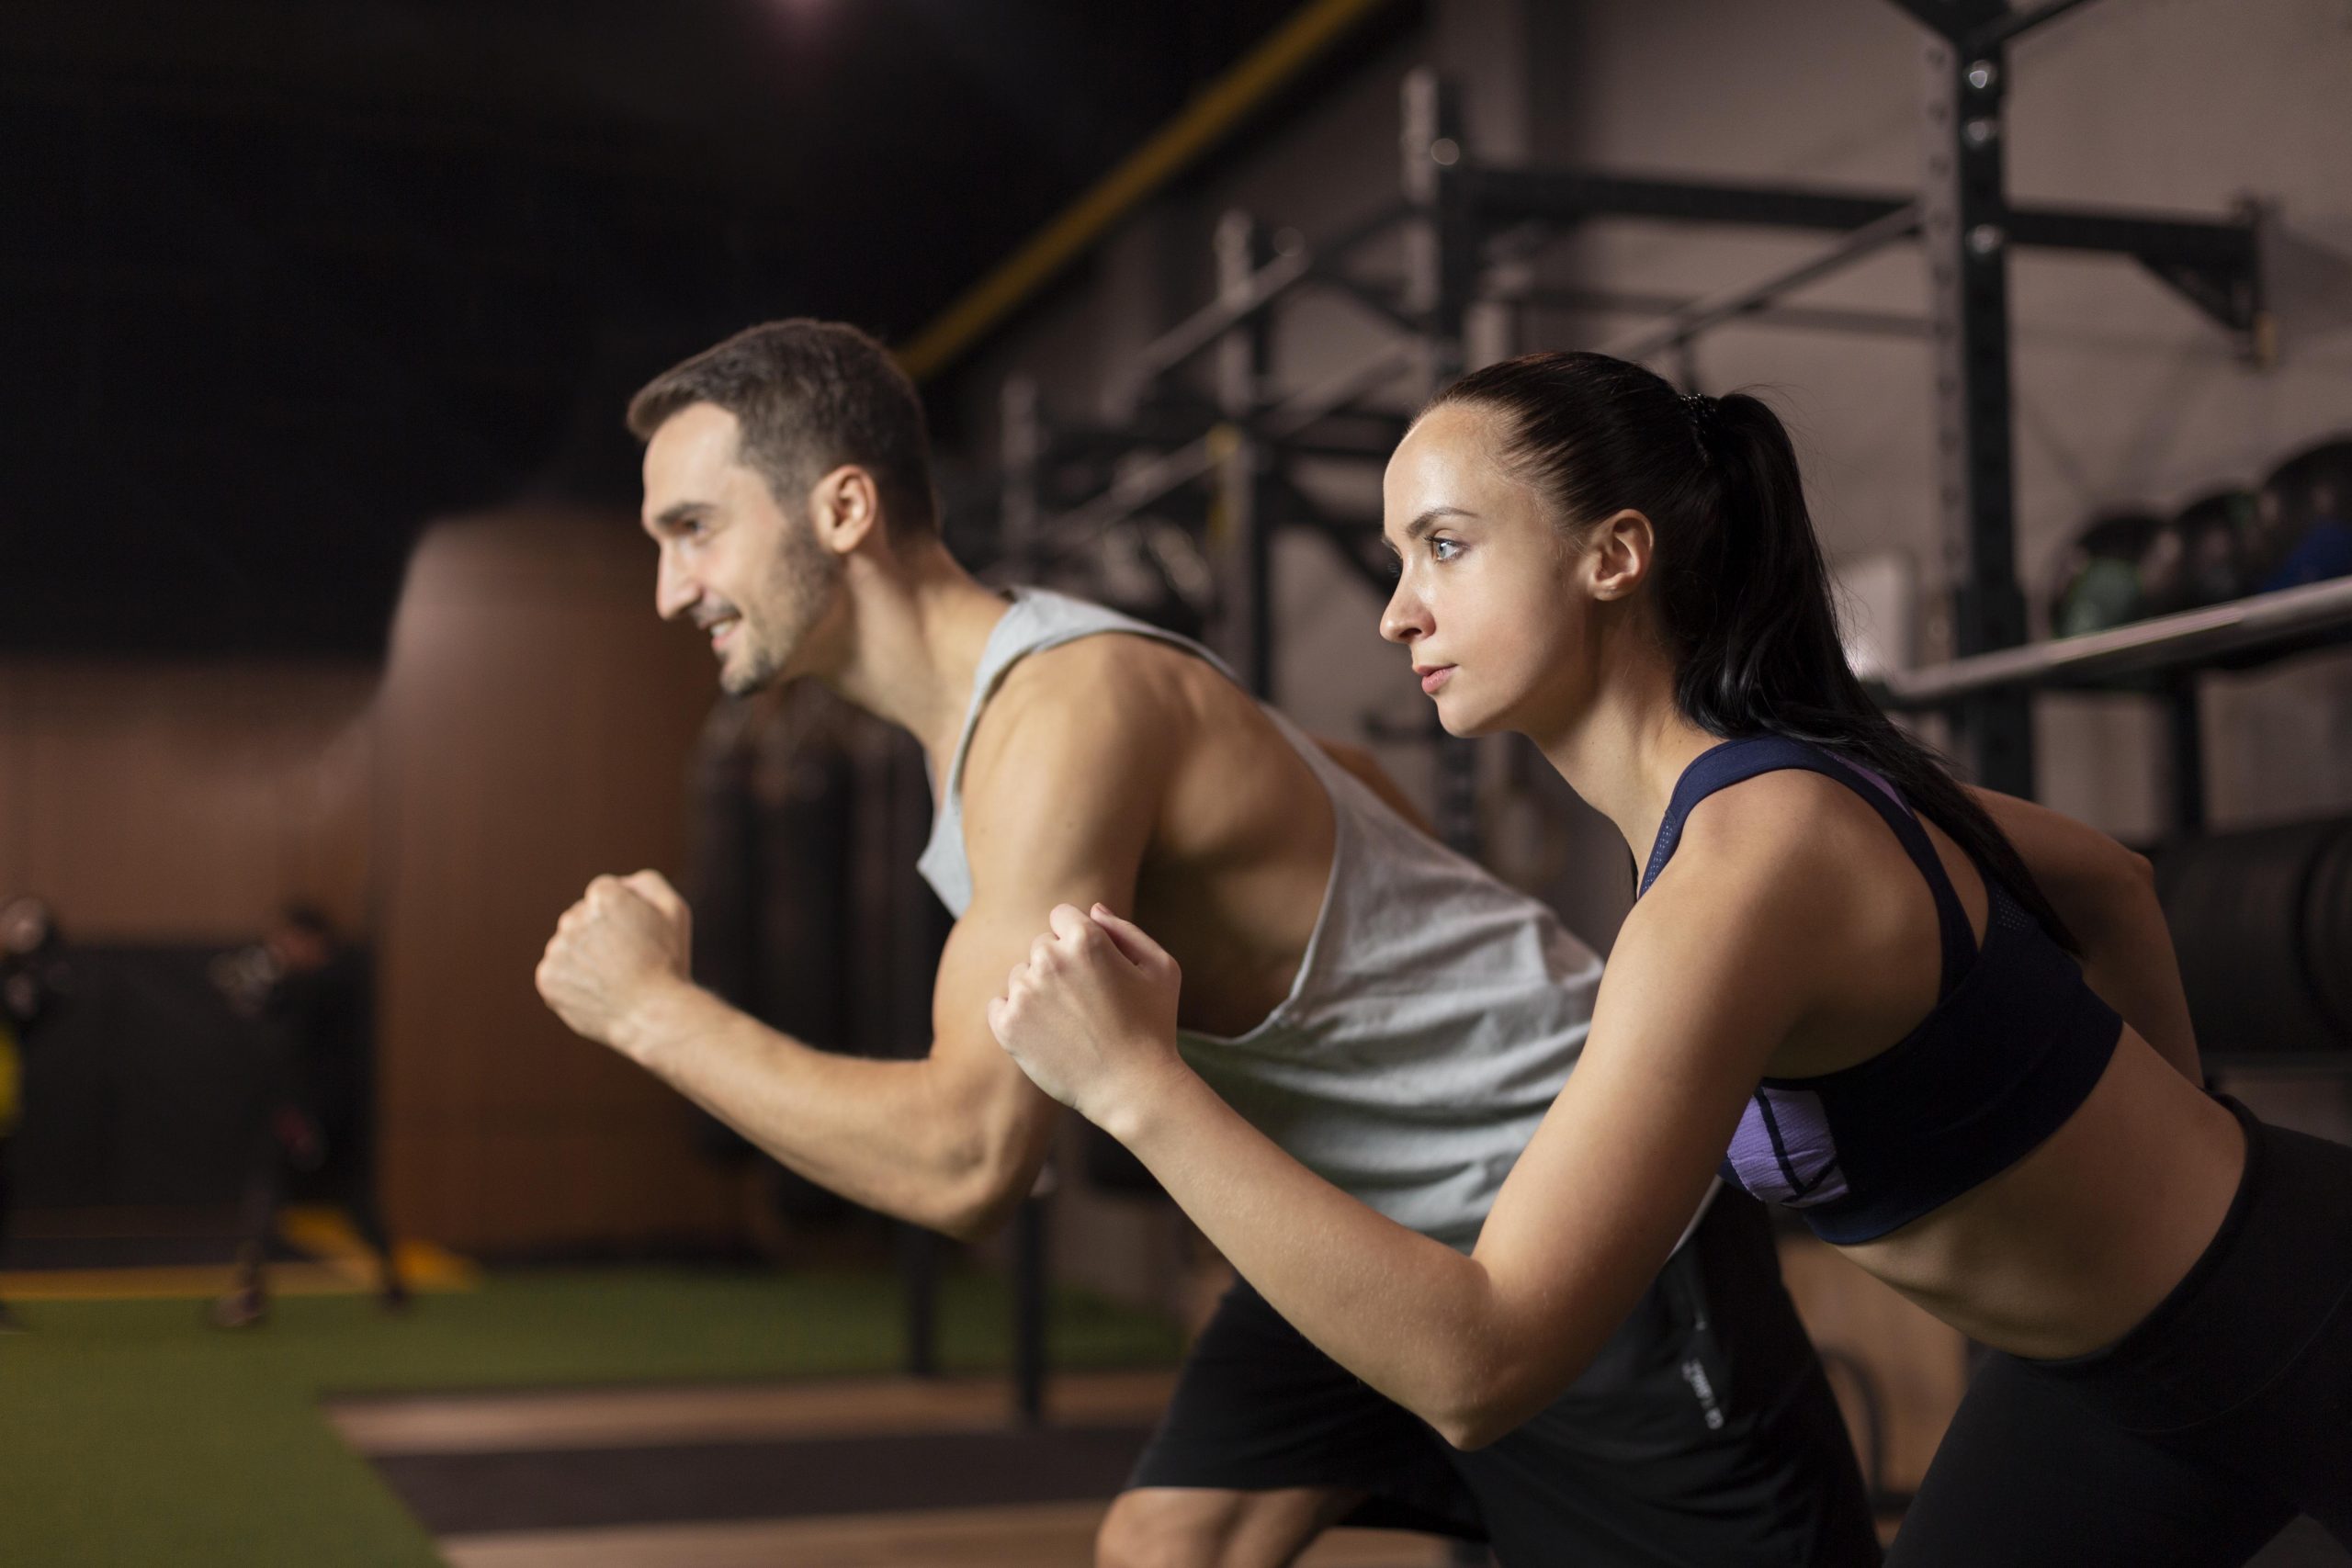 man and a woman training together on metformin